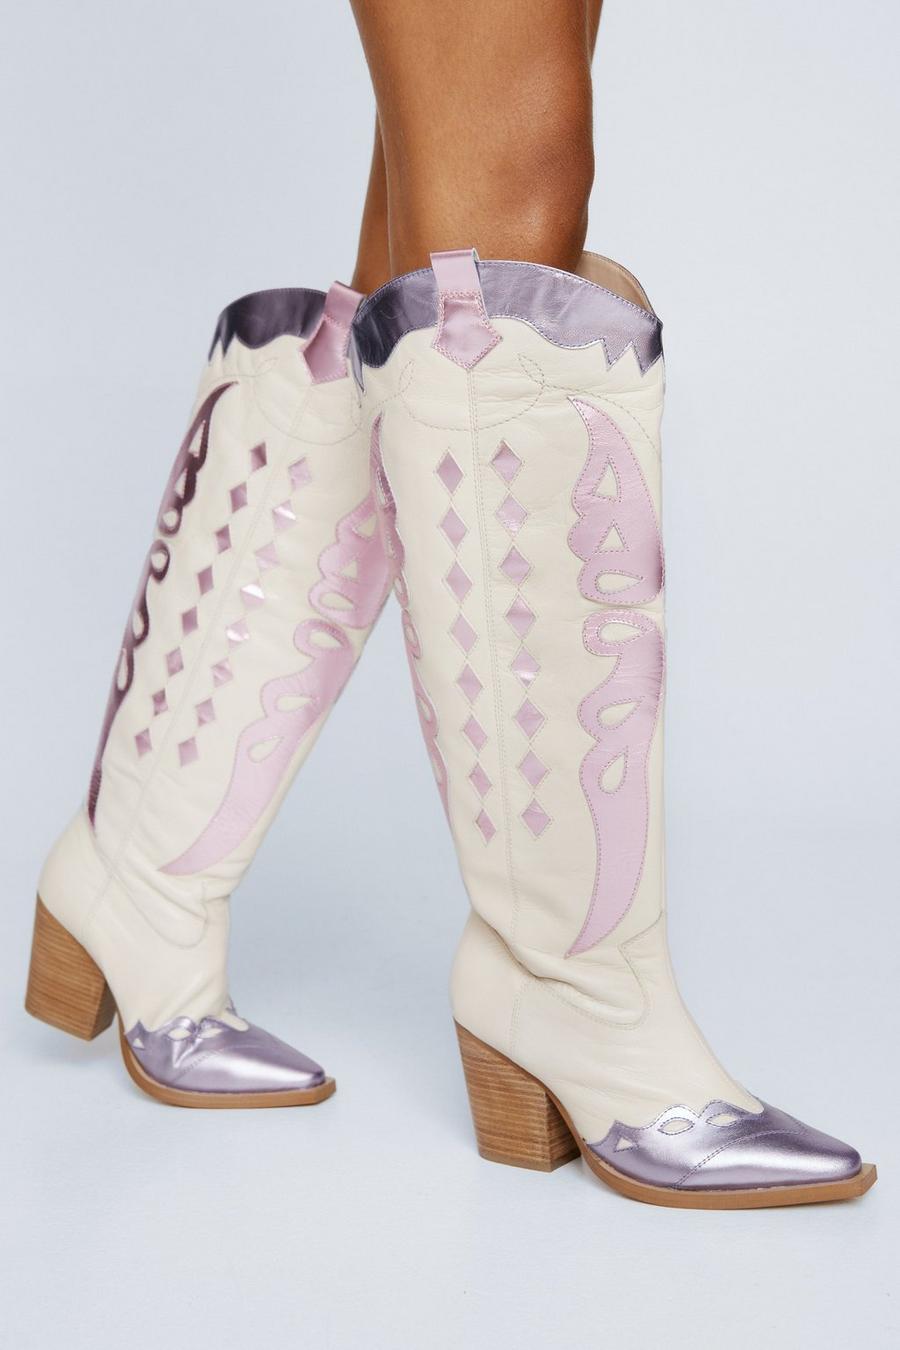 Leather Metallic Butterfly Knee High Western Boot